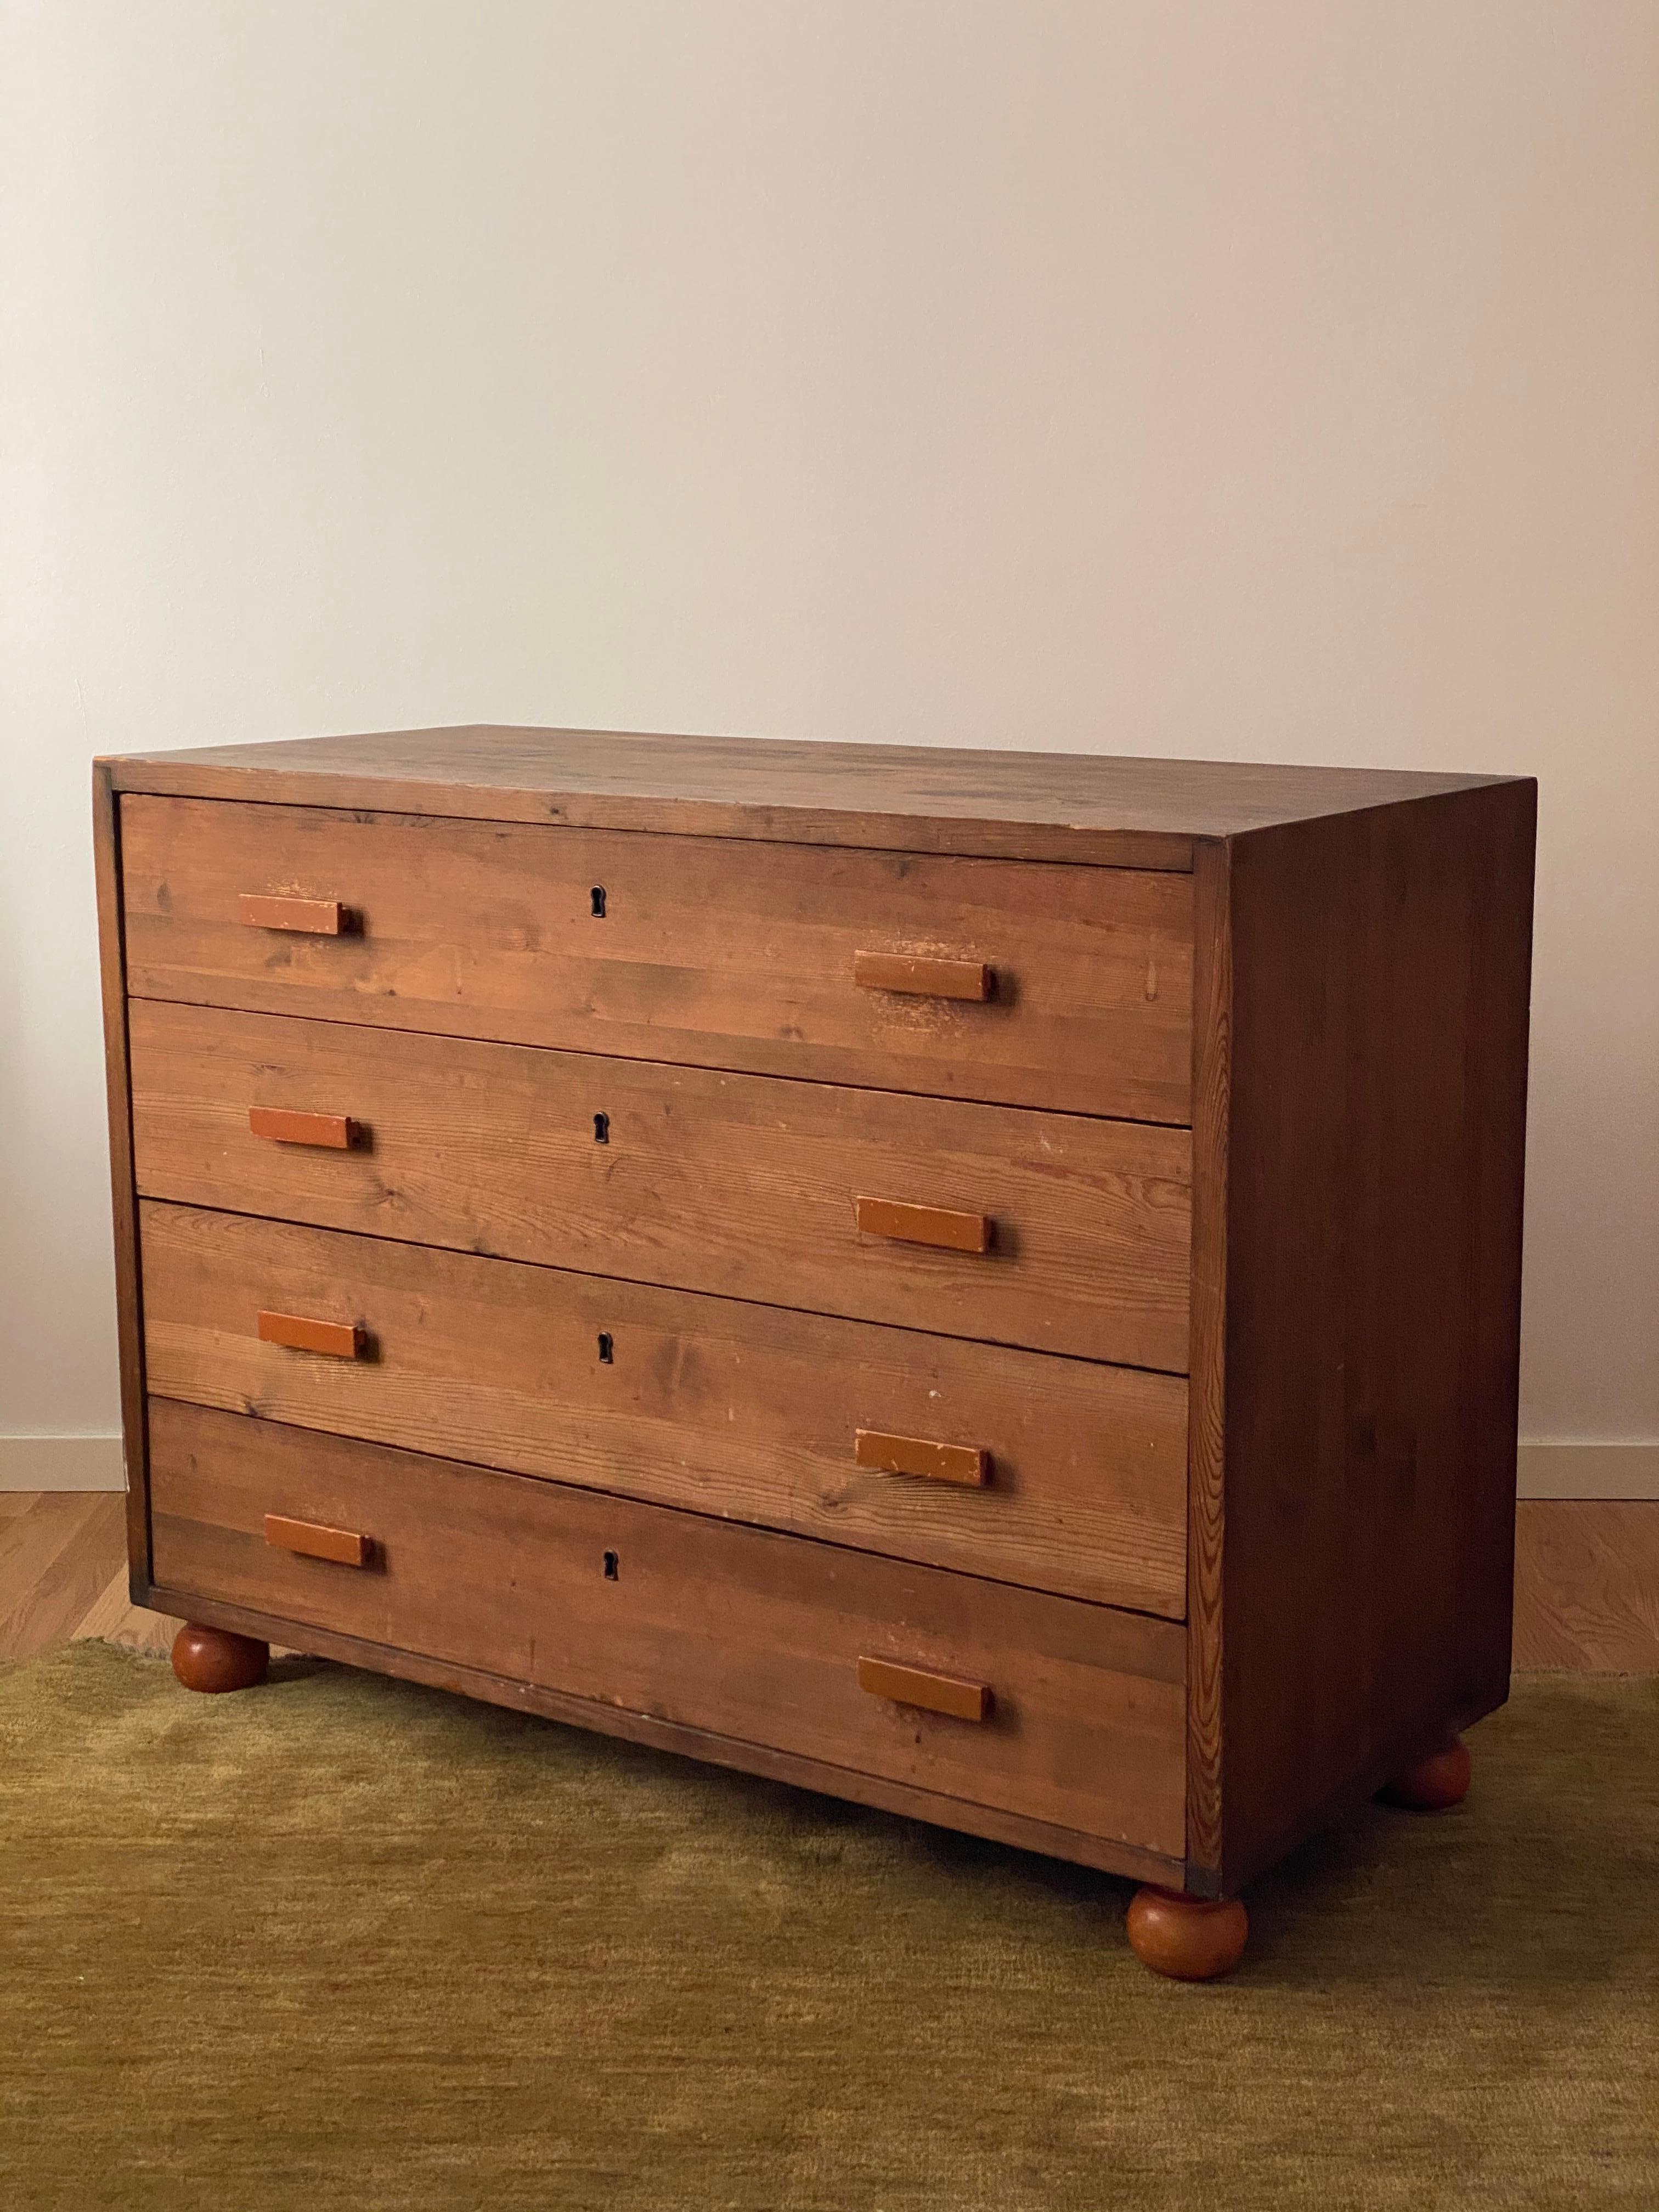 A highly functionalist chest of drawers in stained pine. Features beautifully contrasting pulls and round legs in stained beech. Designed by an unknown Swedish designer, 1940s. 

Other designers of the period include Axel Einar Hjorth, Alvar